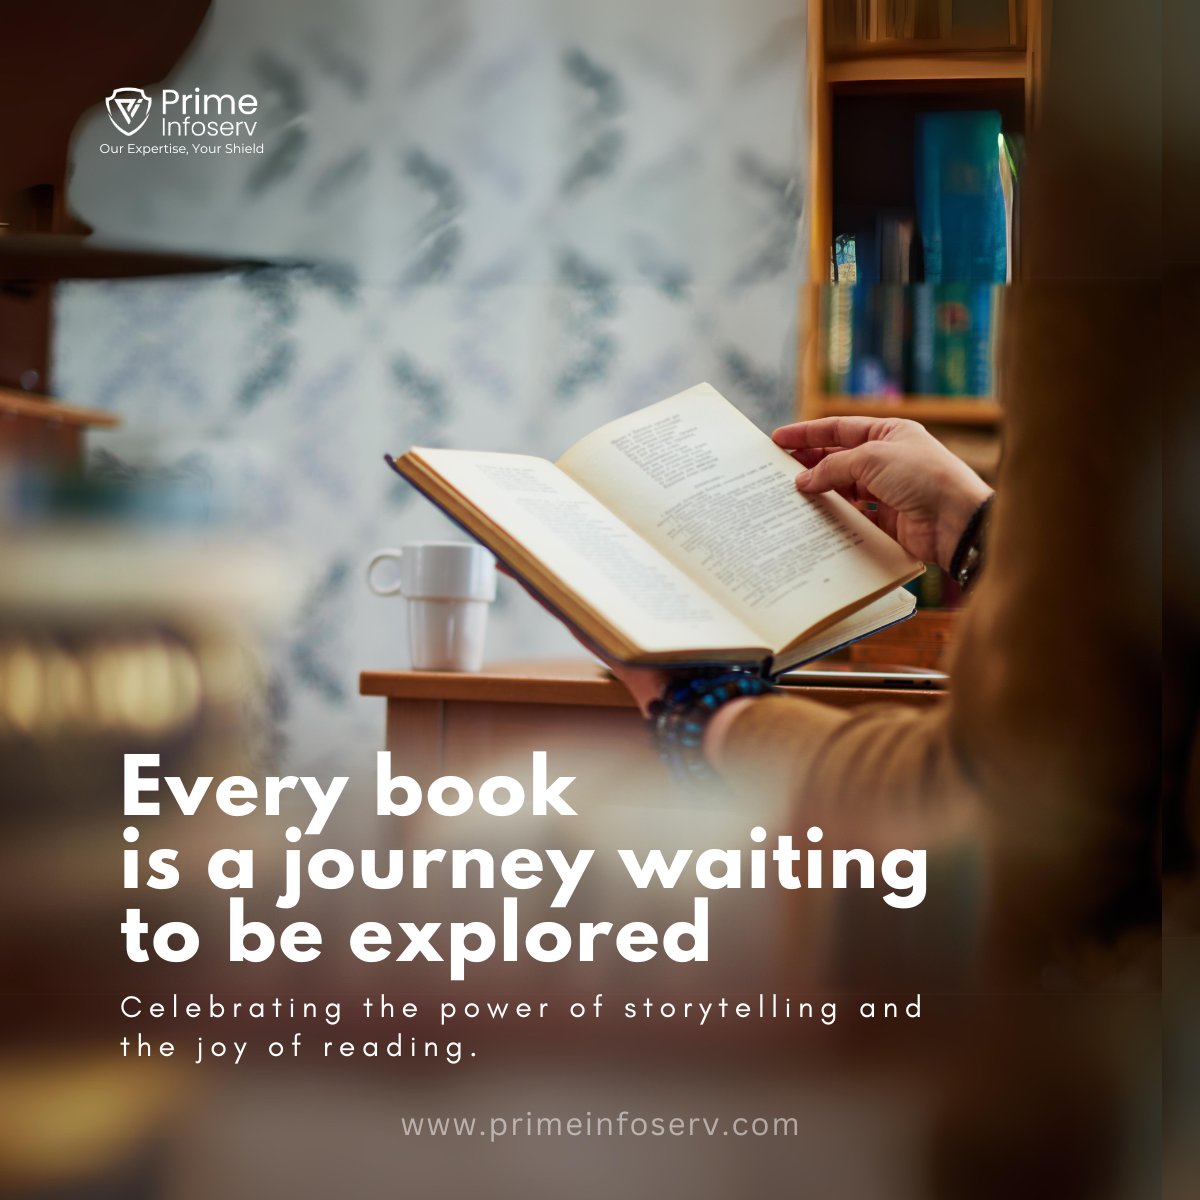 Every book is a journey waiting to be explored. Celebrating the power of storytelling and the joy of reading.  #worldbookday #Primeinfoserv

 #prime #cybersecurity #dataprotection #technology #infosec